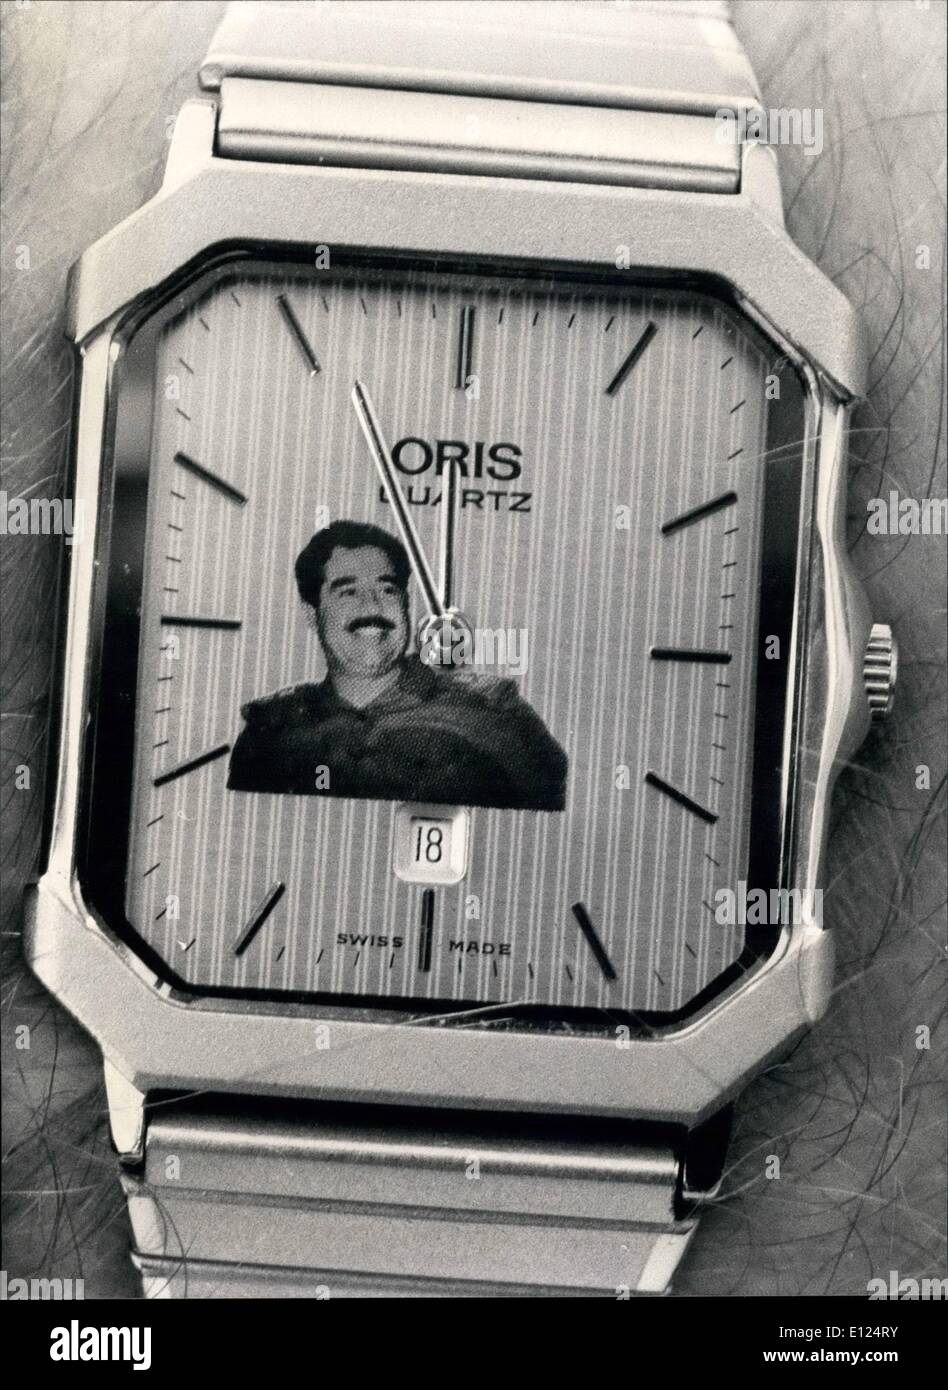 Dec. 12, 1990 - Time is running for Saddam: A Swiss watchmaker-company decided to make money on warfare their way by sending on Stock Photo